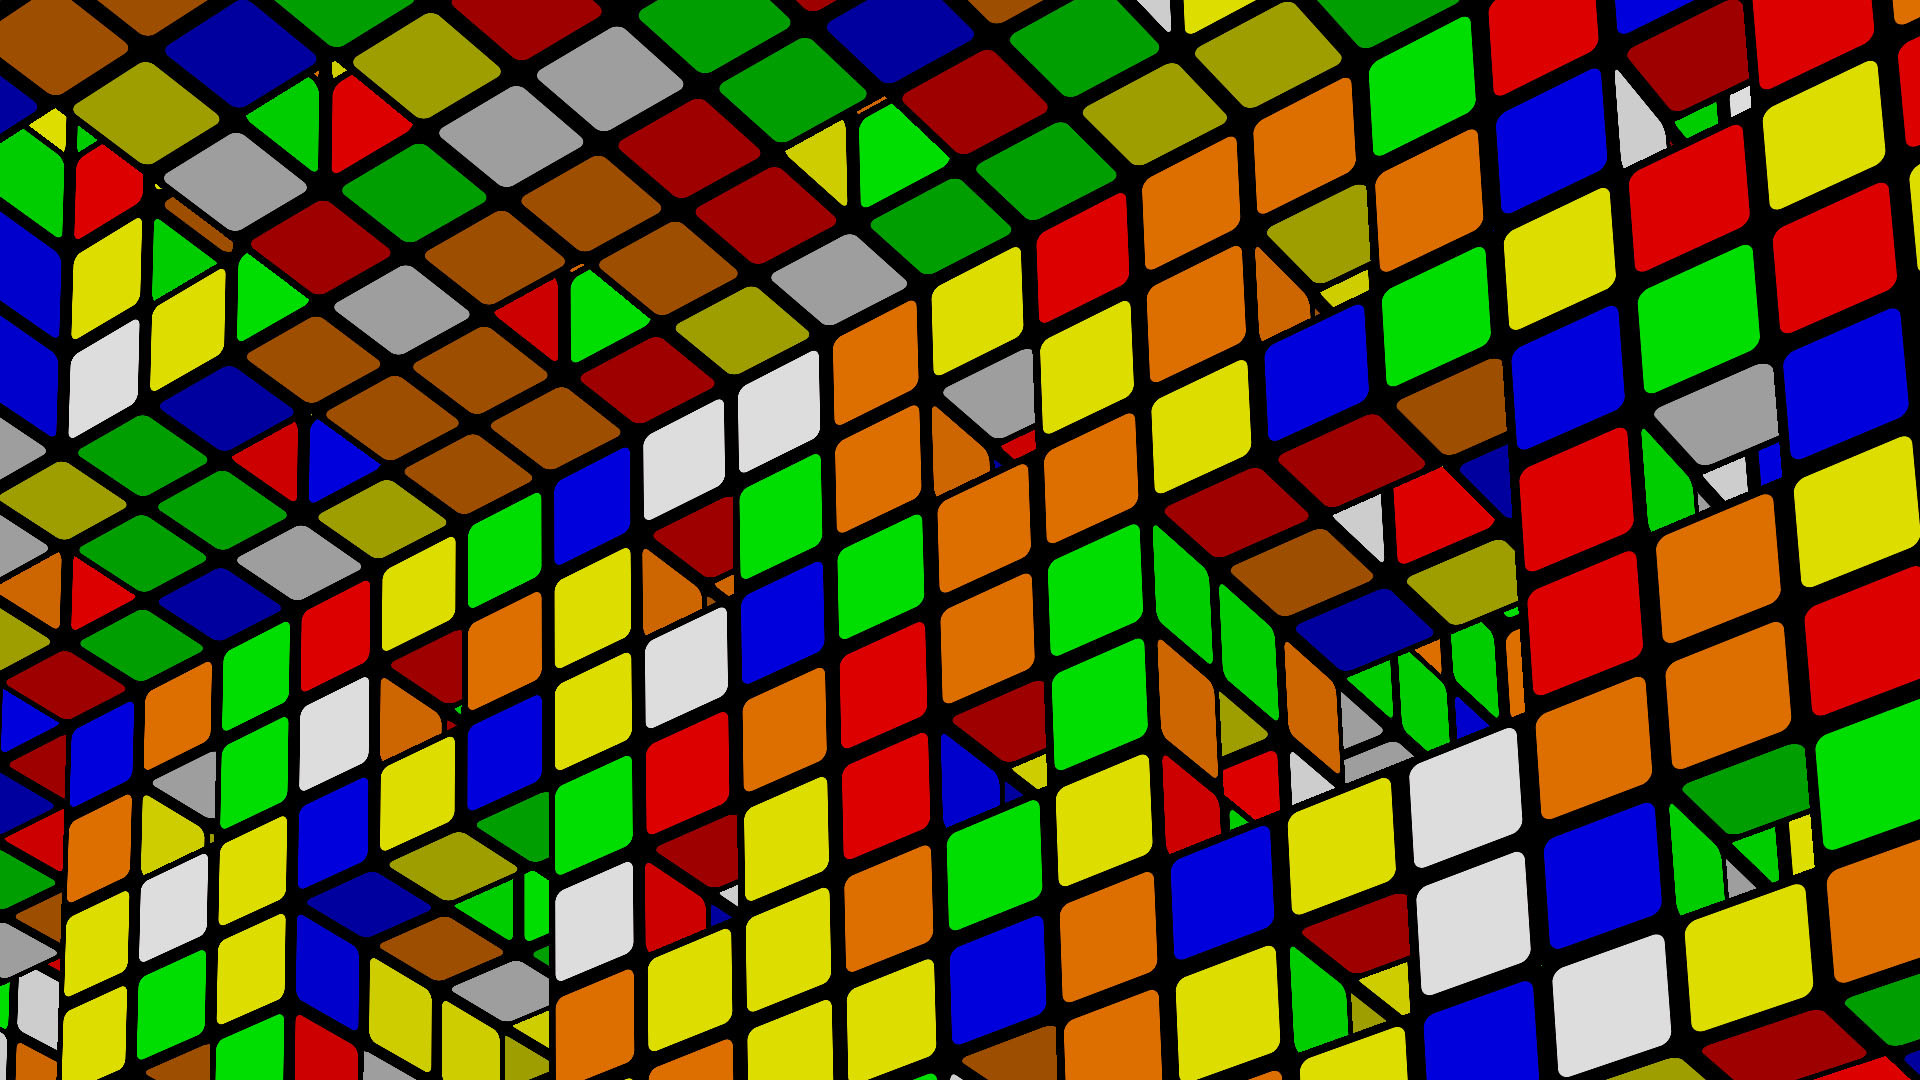 rubik's wallpaper,pattern,symmetry,design,colorfulness,tints and shades